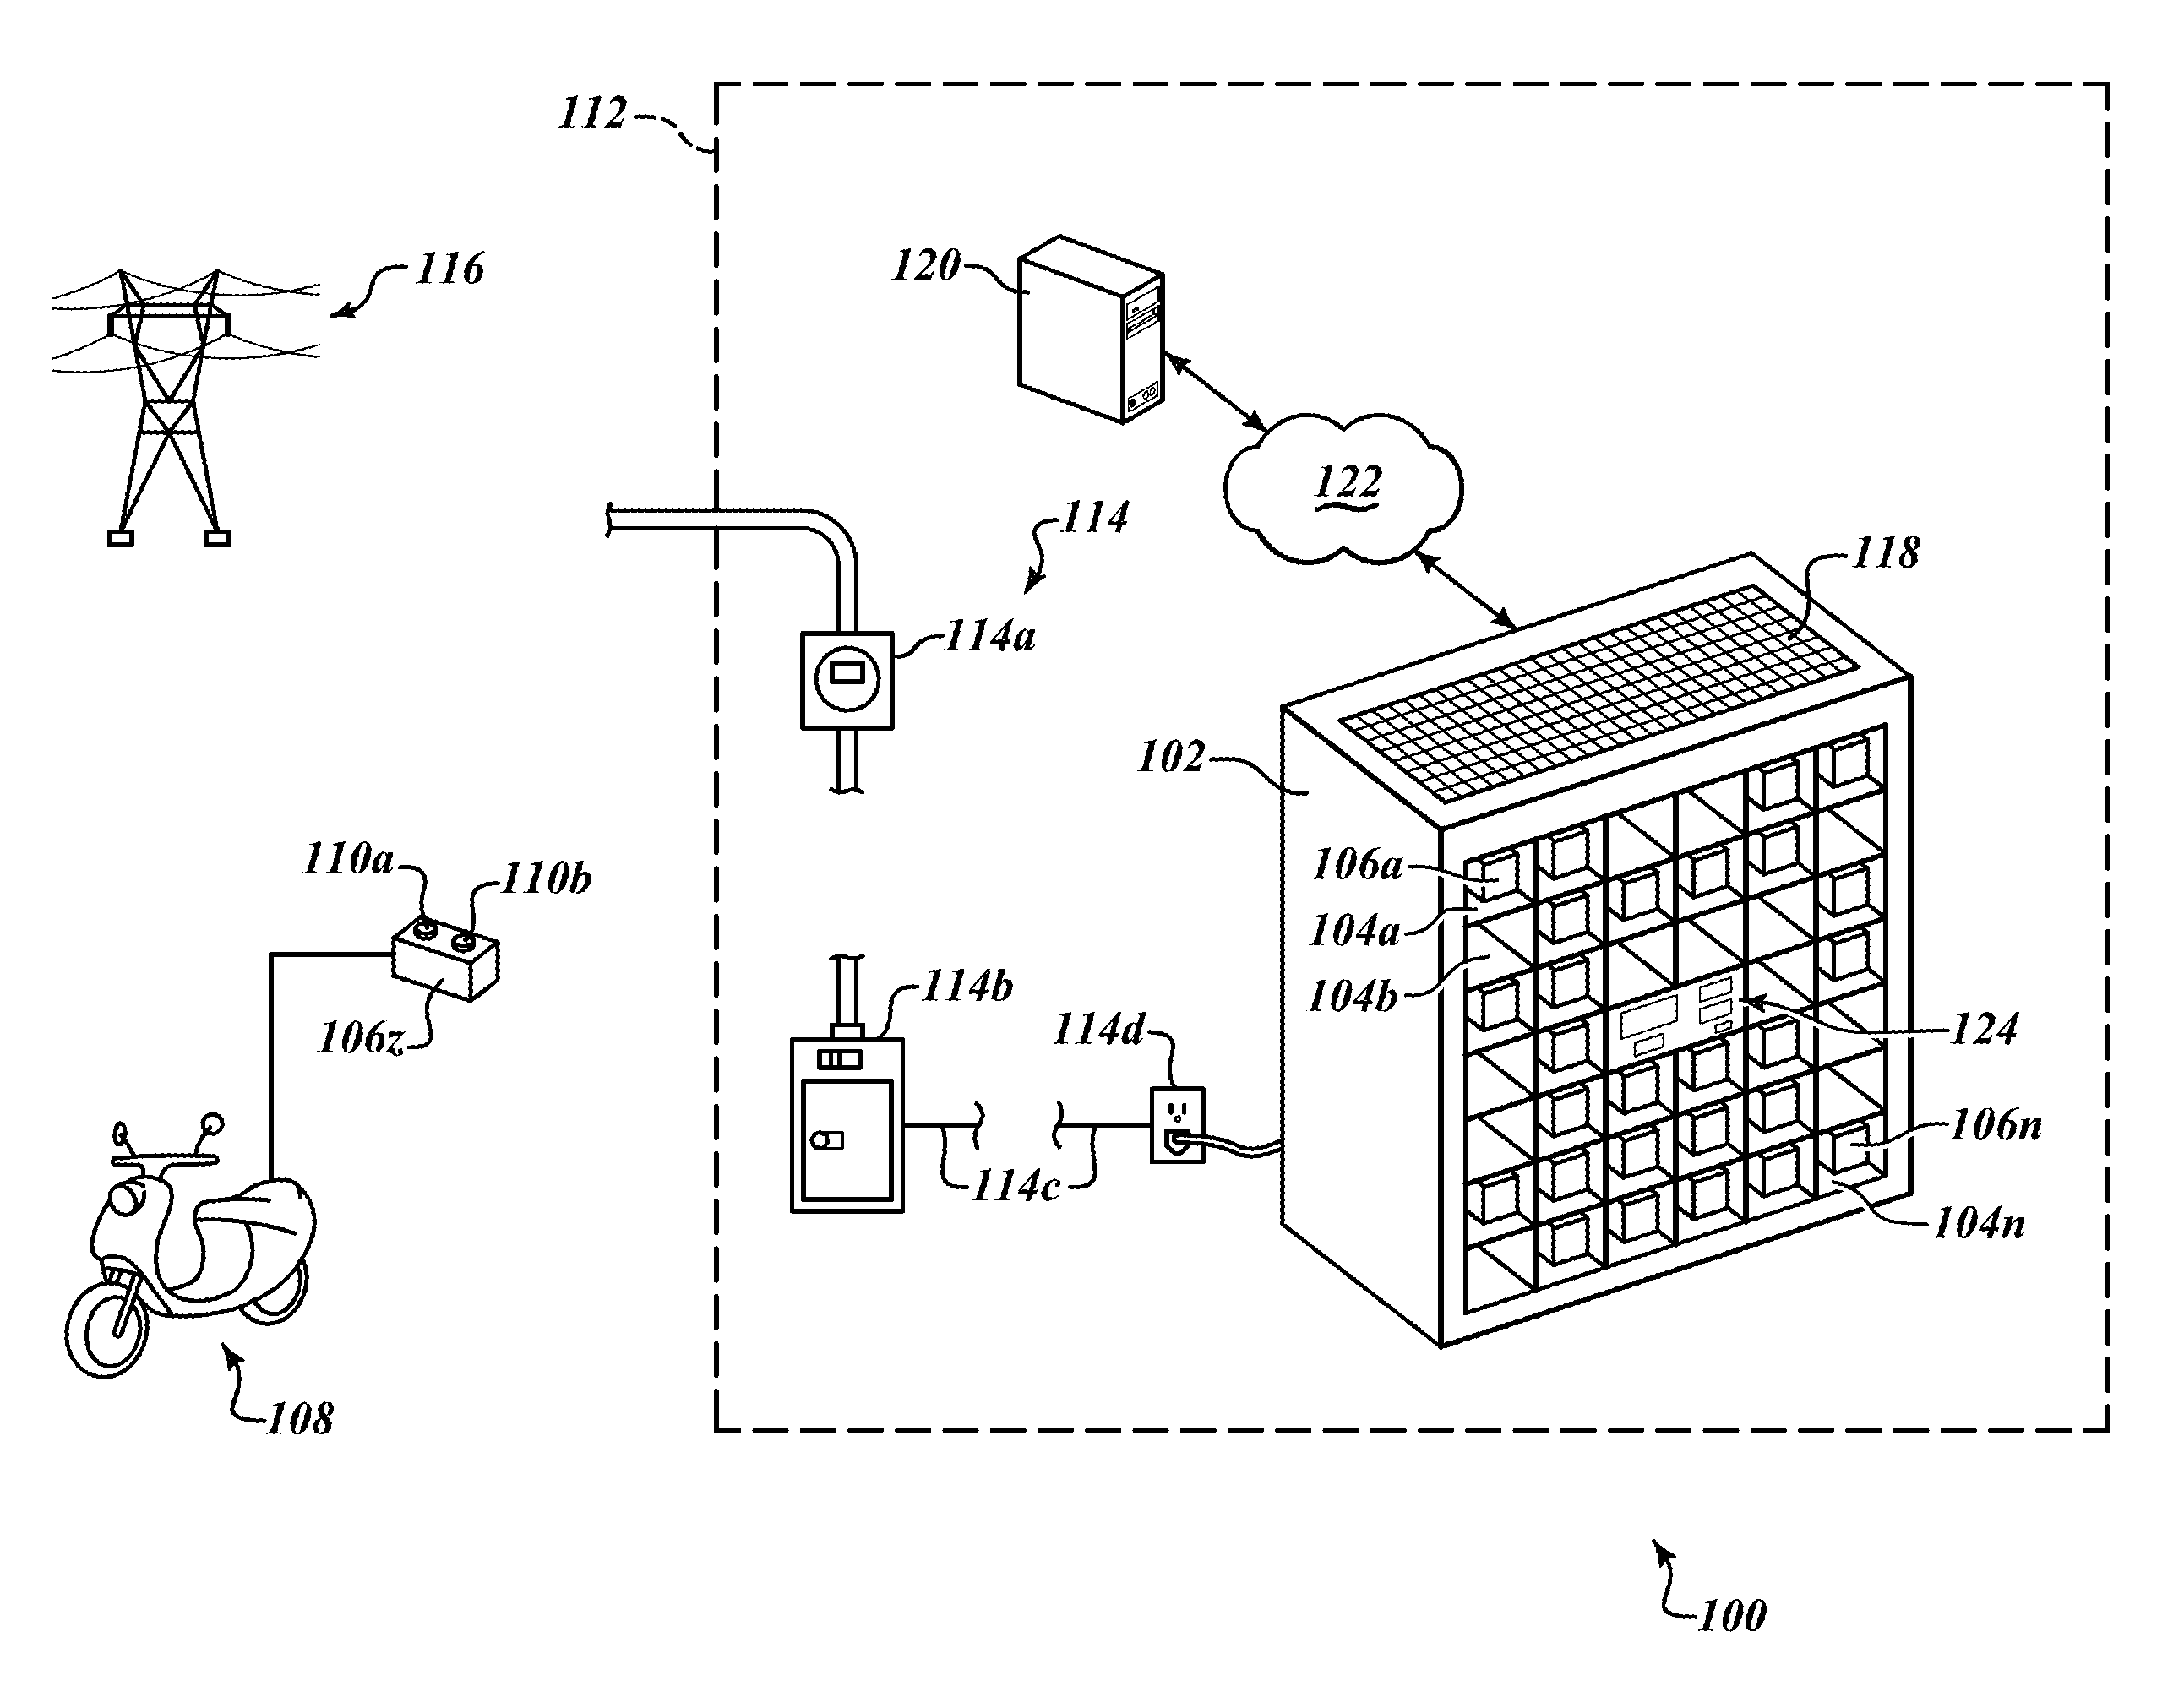 Apparatus, method and article for redistributing power storage devices, such as batteries, between collection, charging and distribution machines